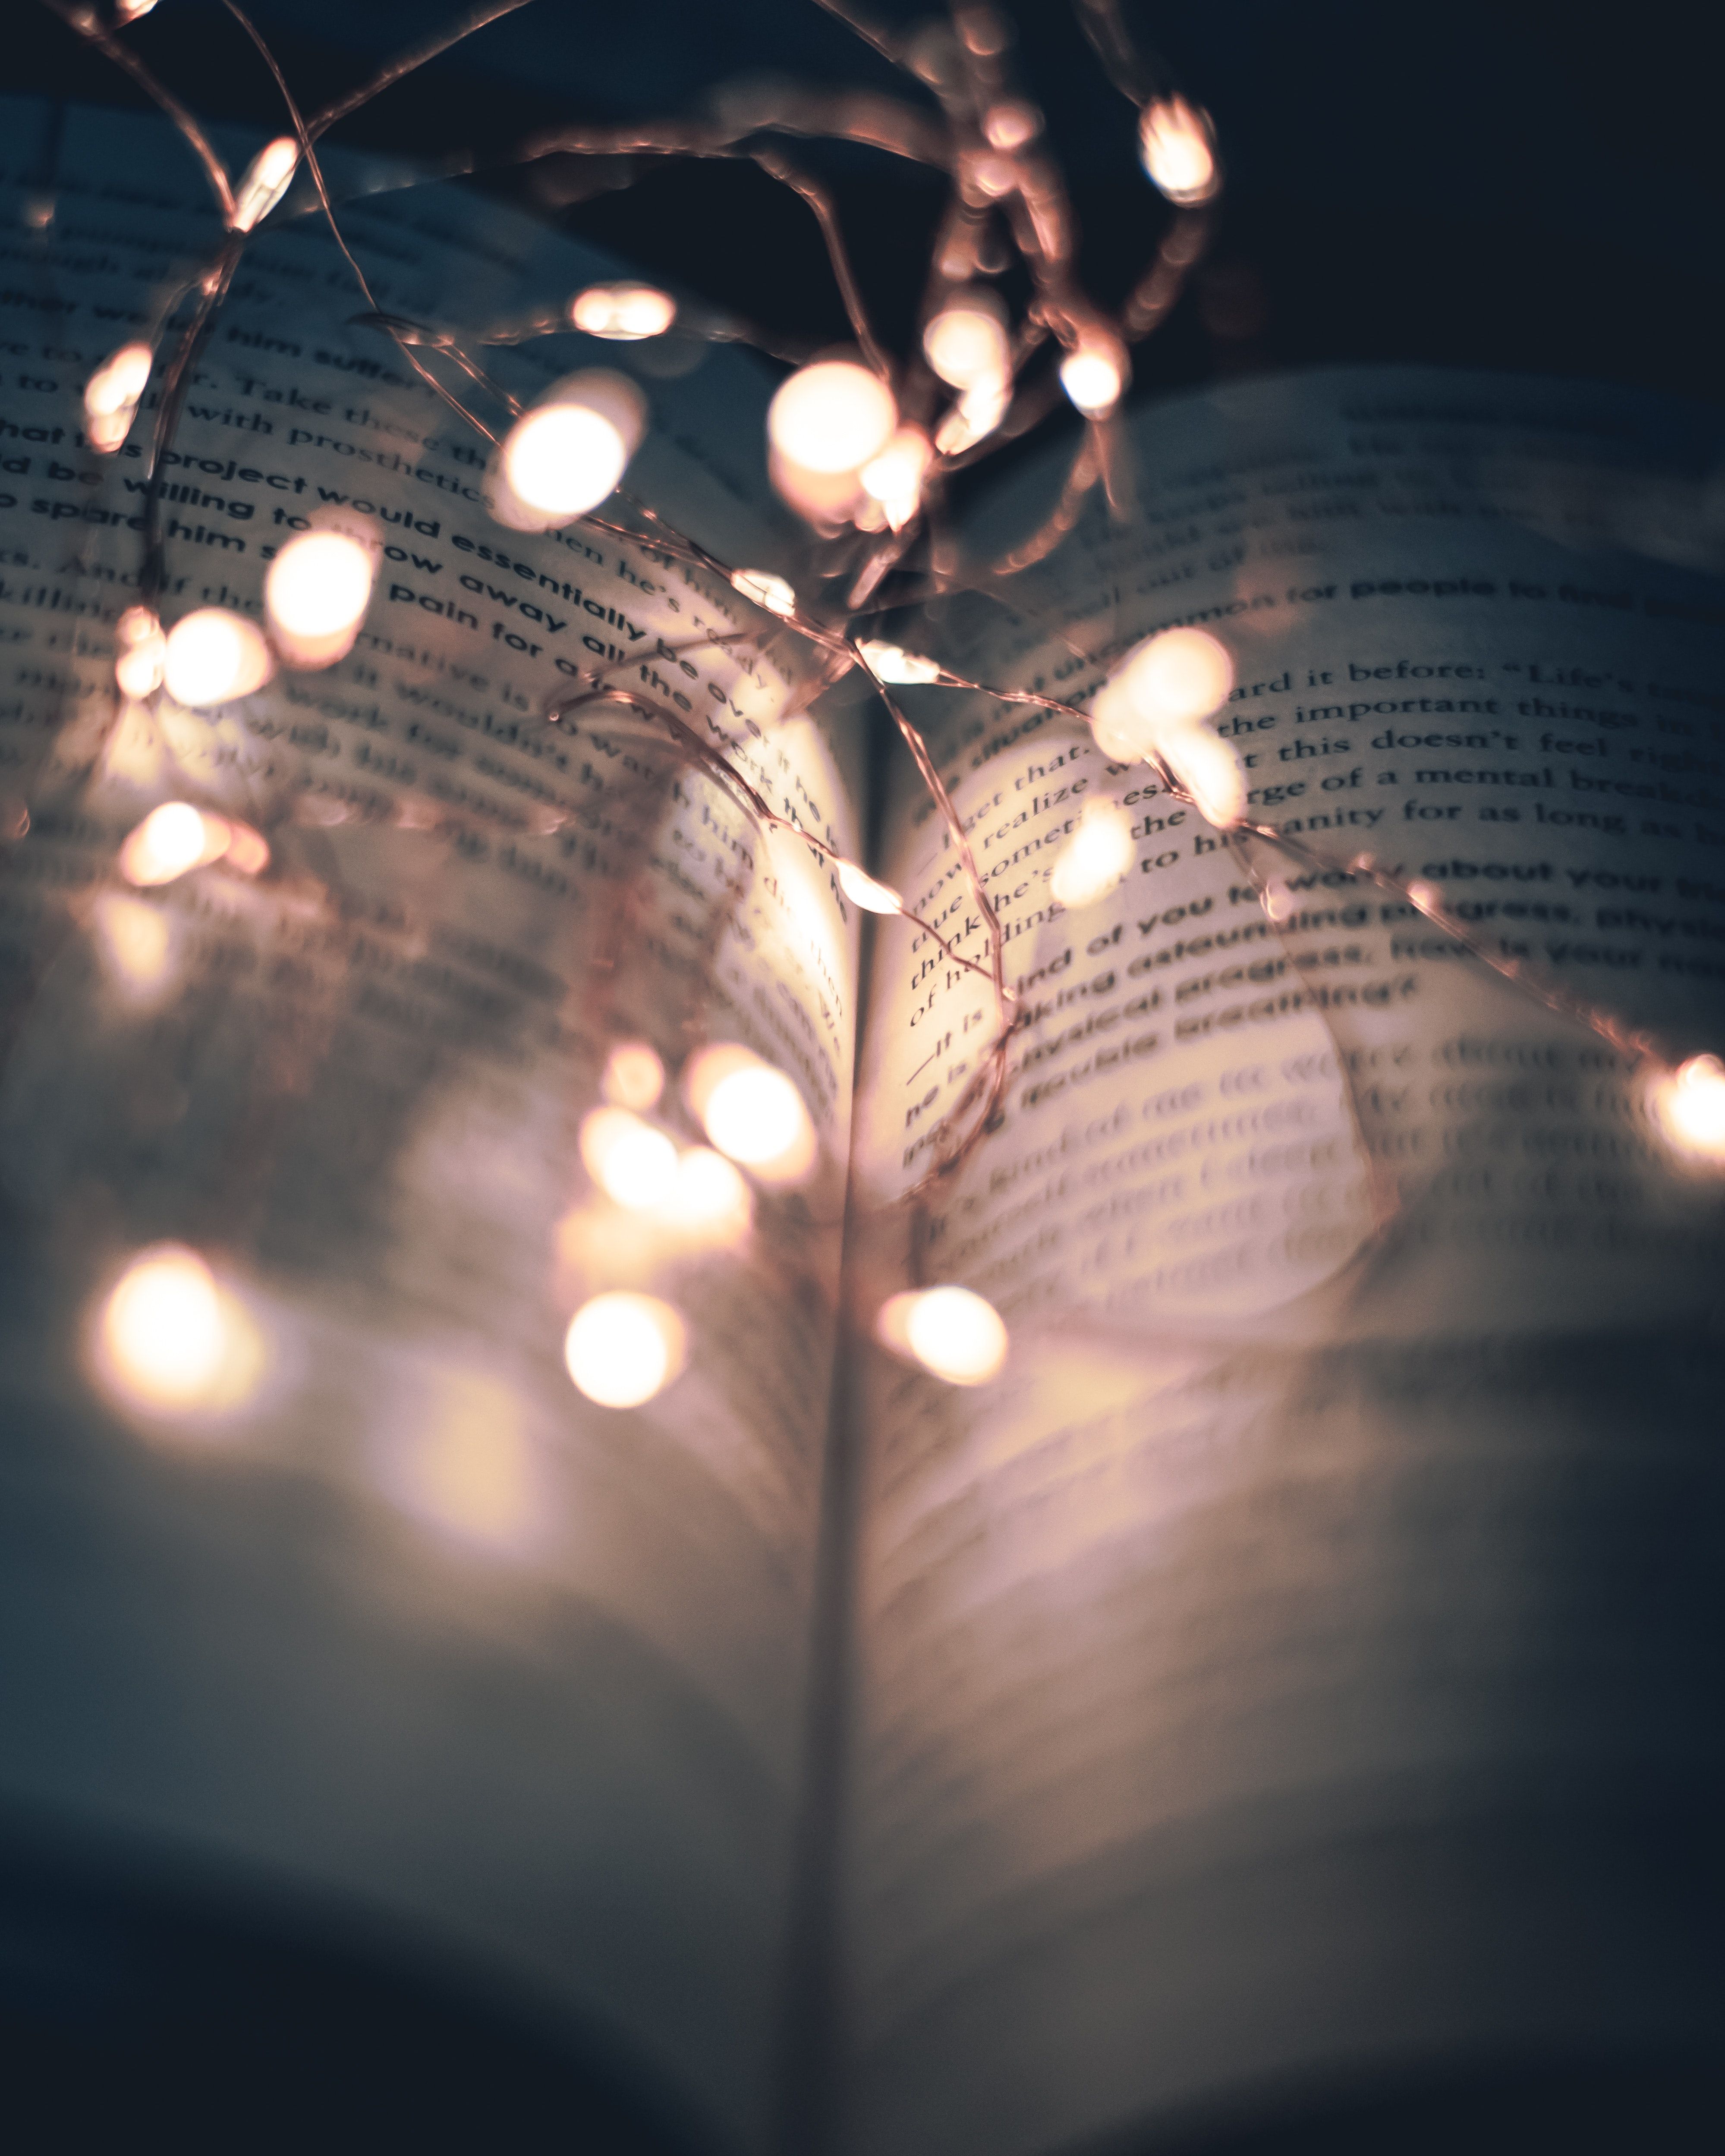 A book with fairy lights on top of it - Fairy lights